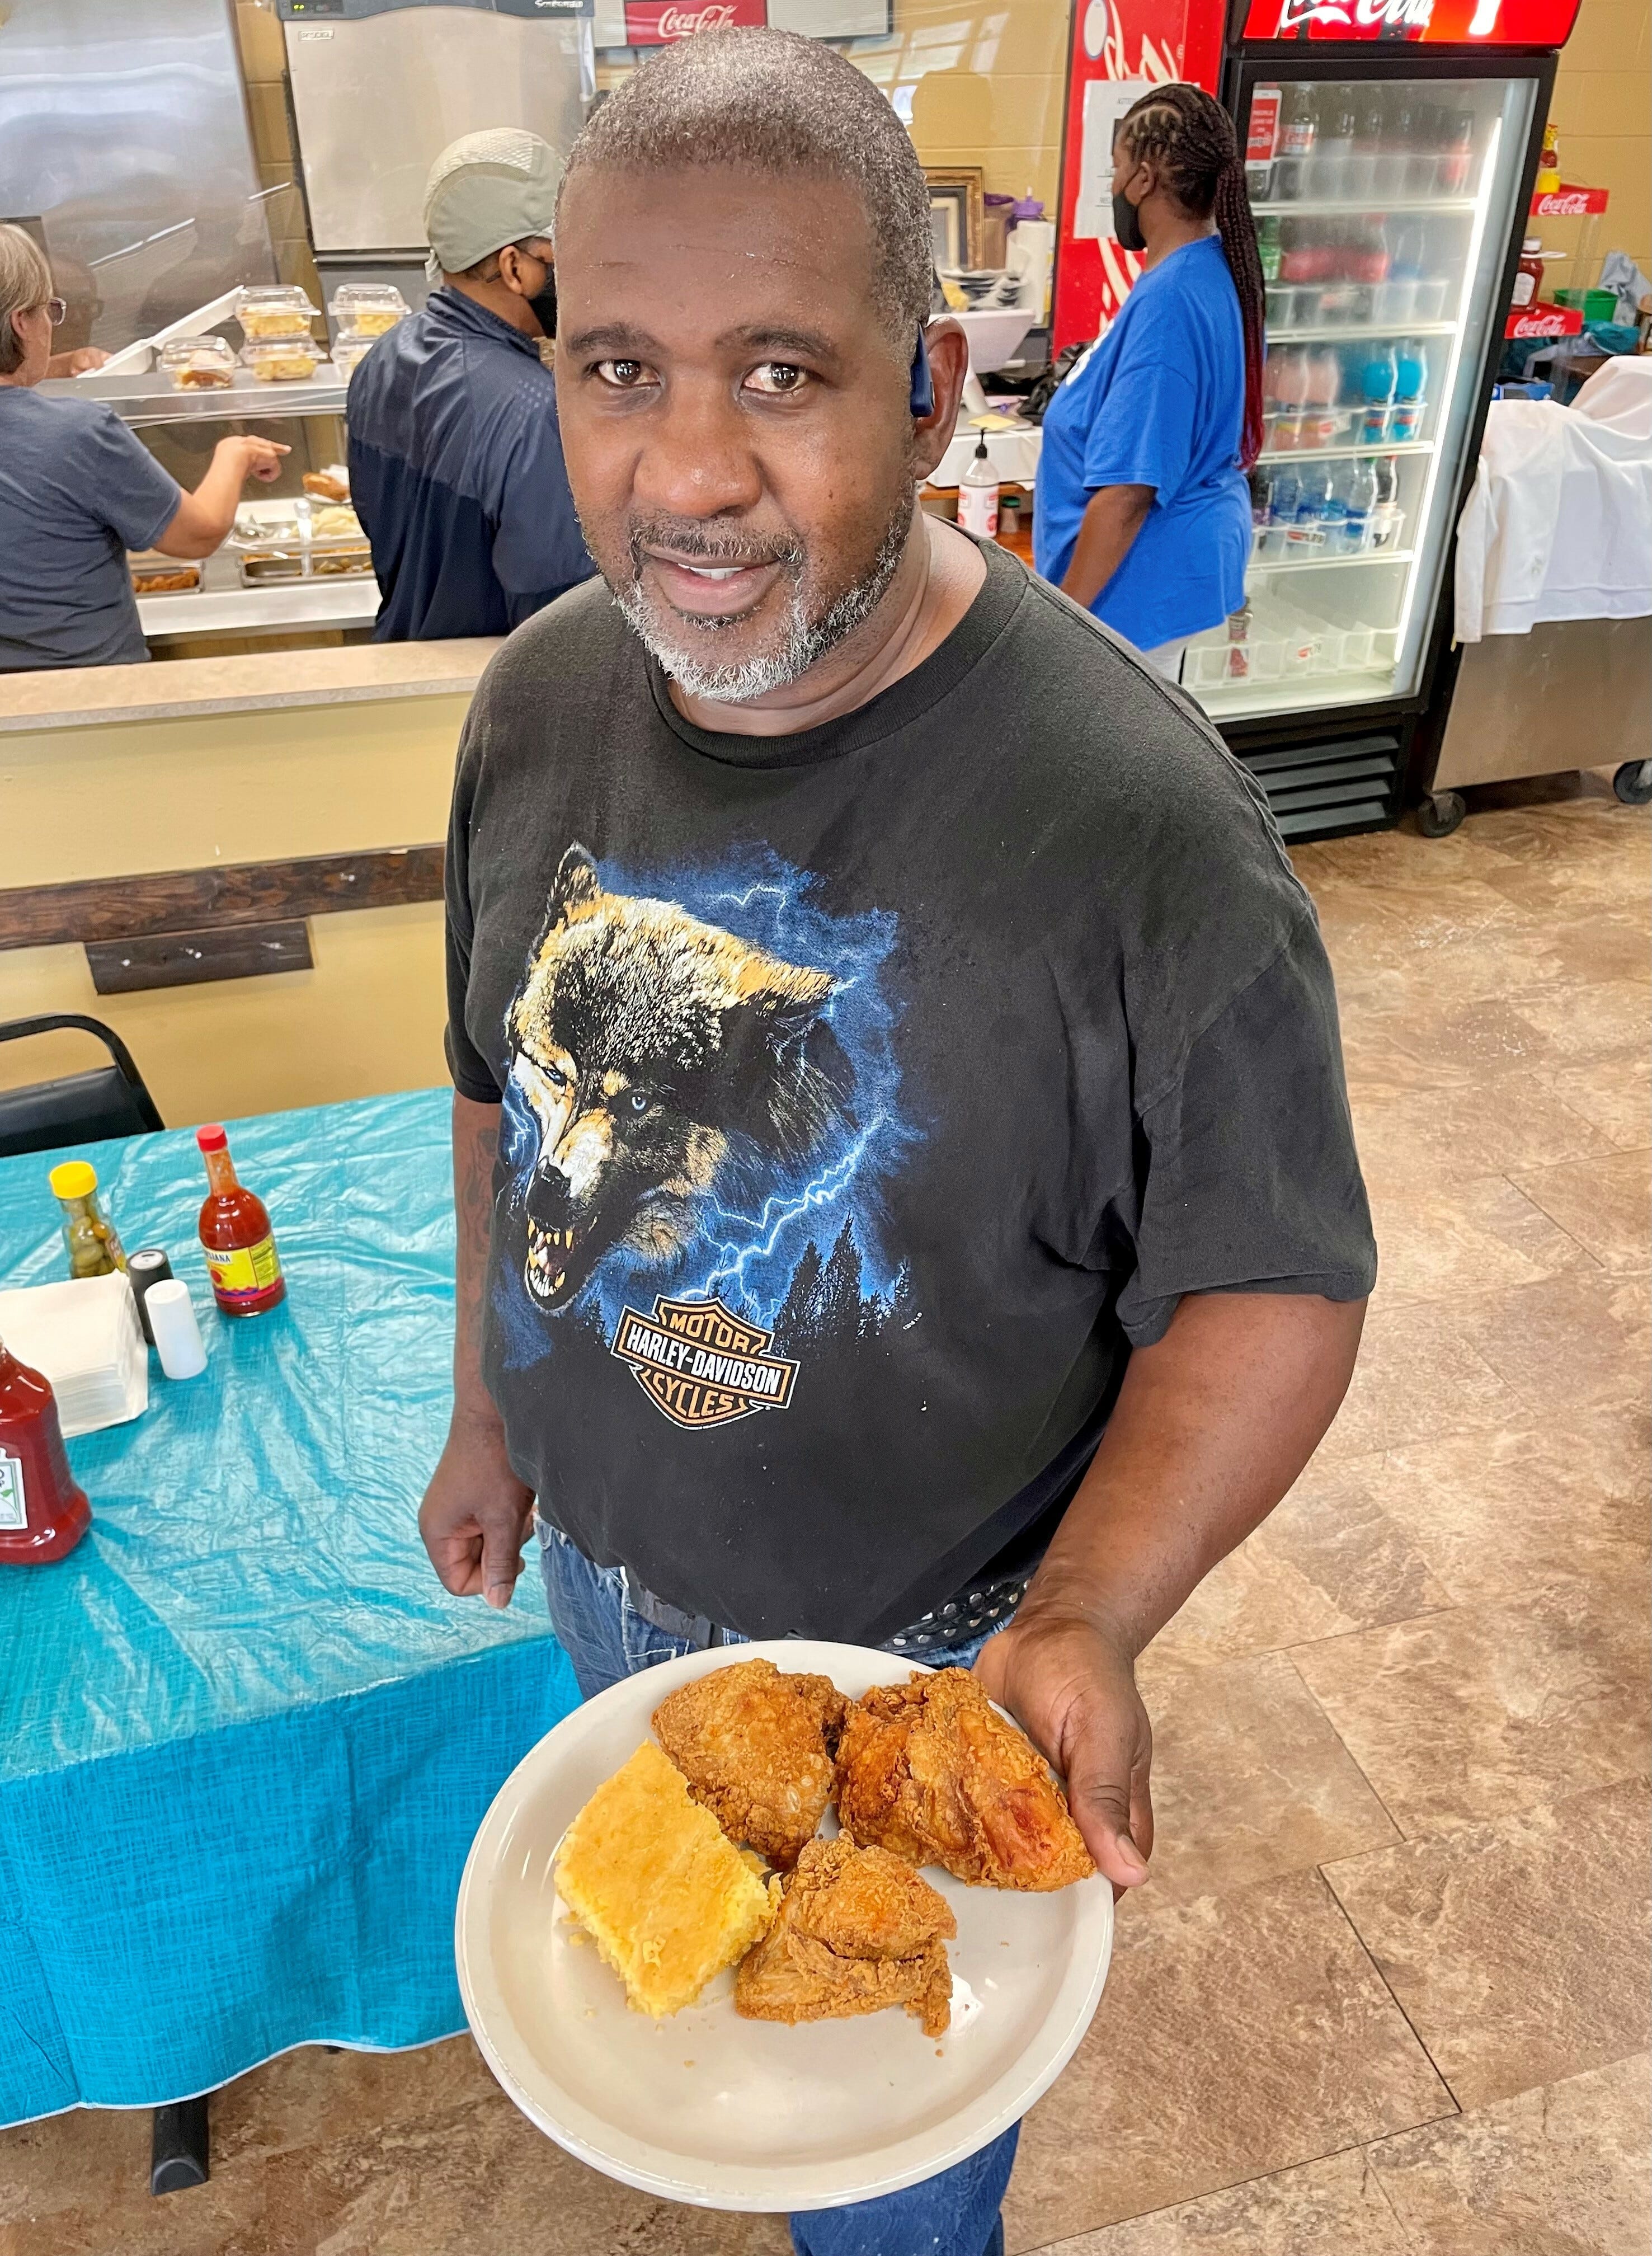 Darryl Gilbert, whose family owns the soul food restaurant Big Momma's in Monroe, La., is famous for the eatery's fried chicken, which was featured on the "Ultimate Fried Chicken Trail" by Louisiana Cookin'.